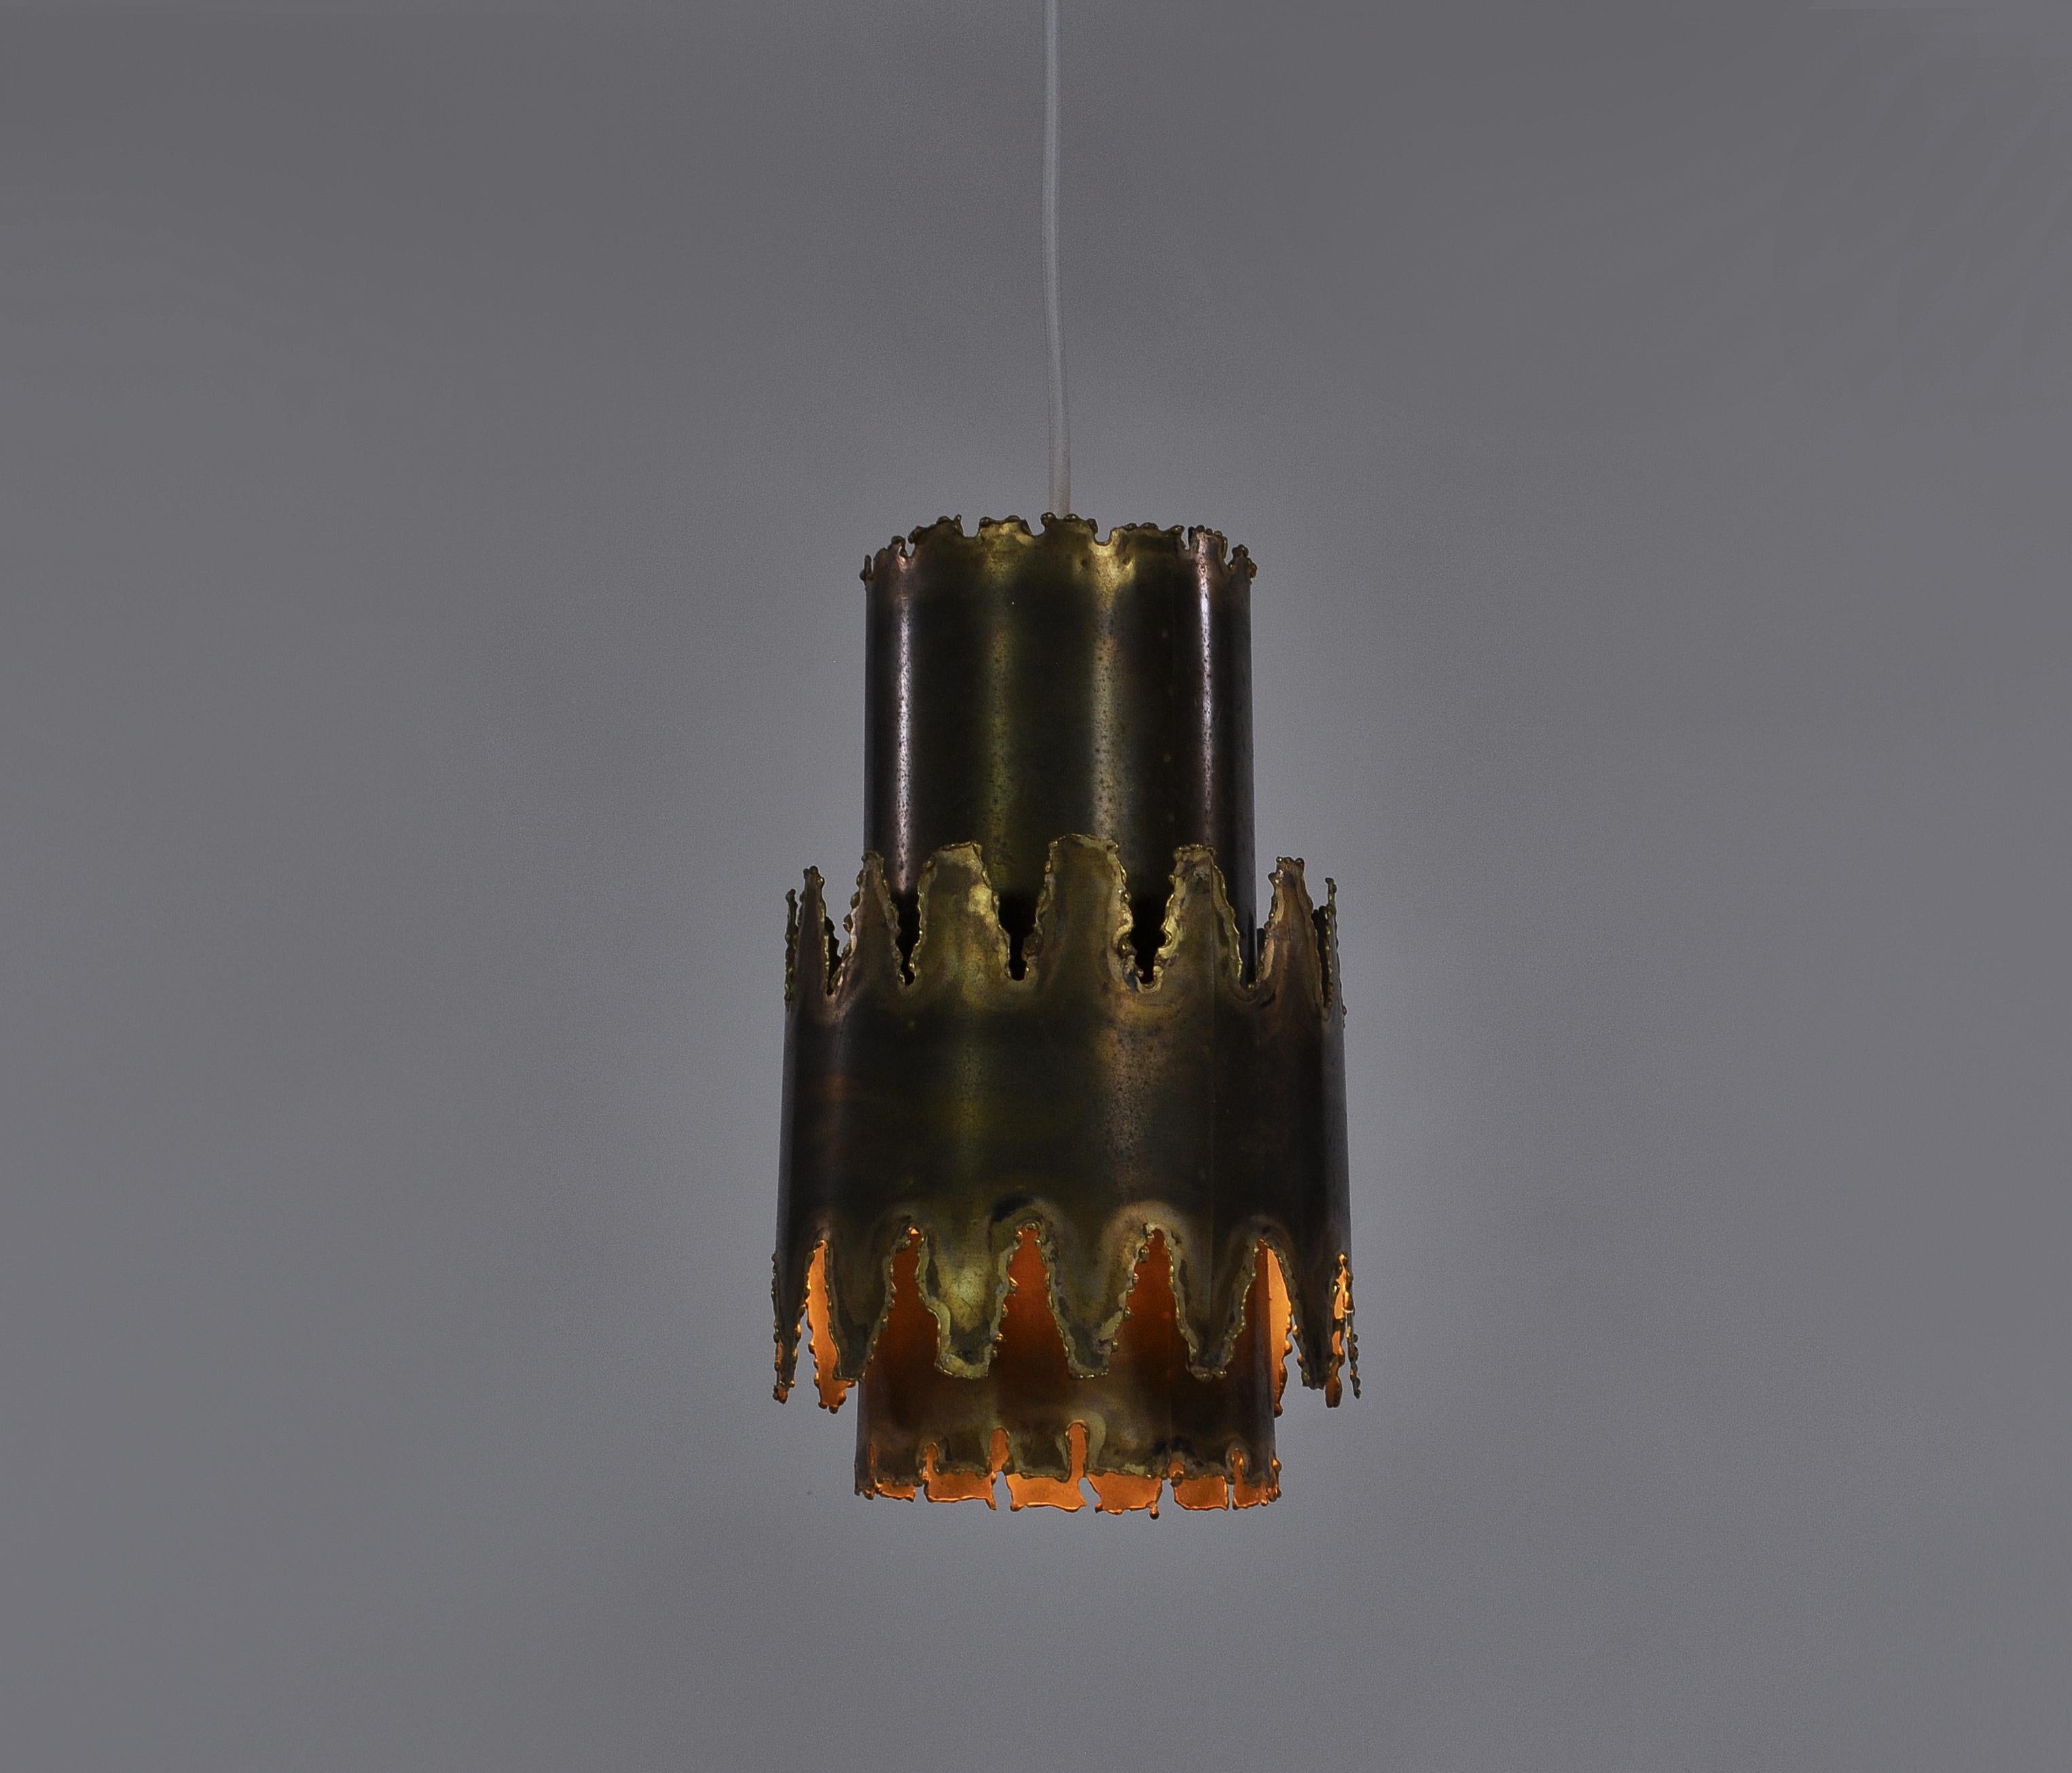 Brass Celing Pendants in Brutalist Style by Svend Aage Holm Sørensen, 1960s In Good Condition For Sale In Odense, DK